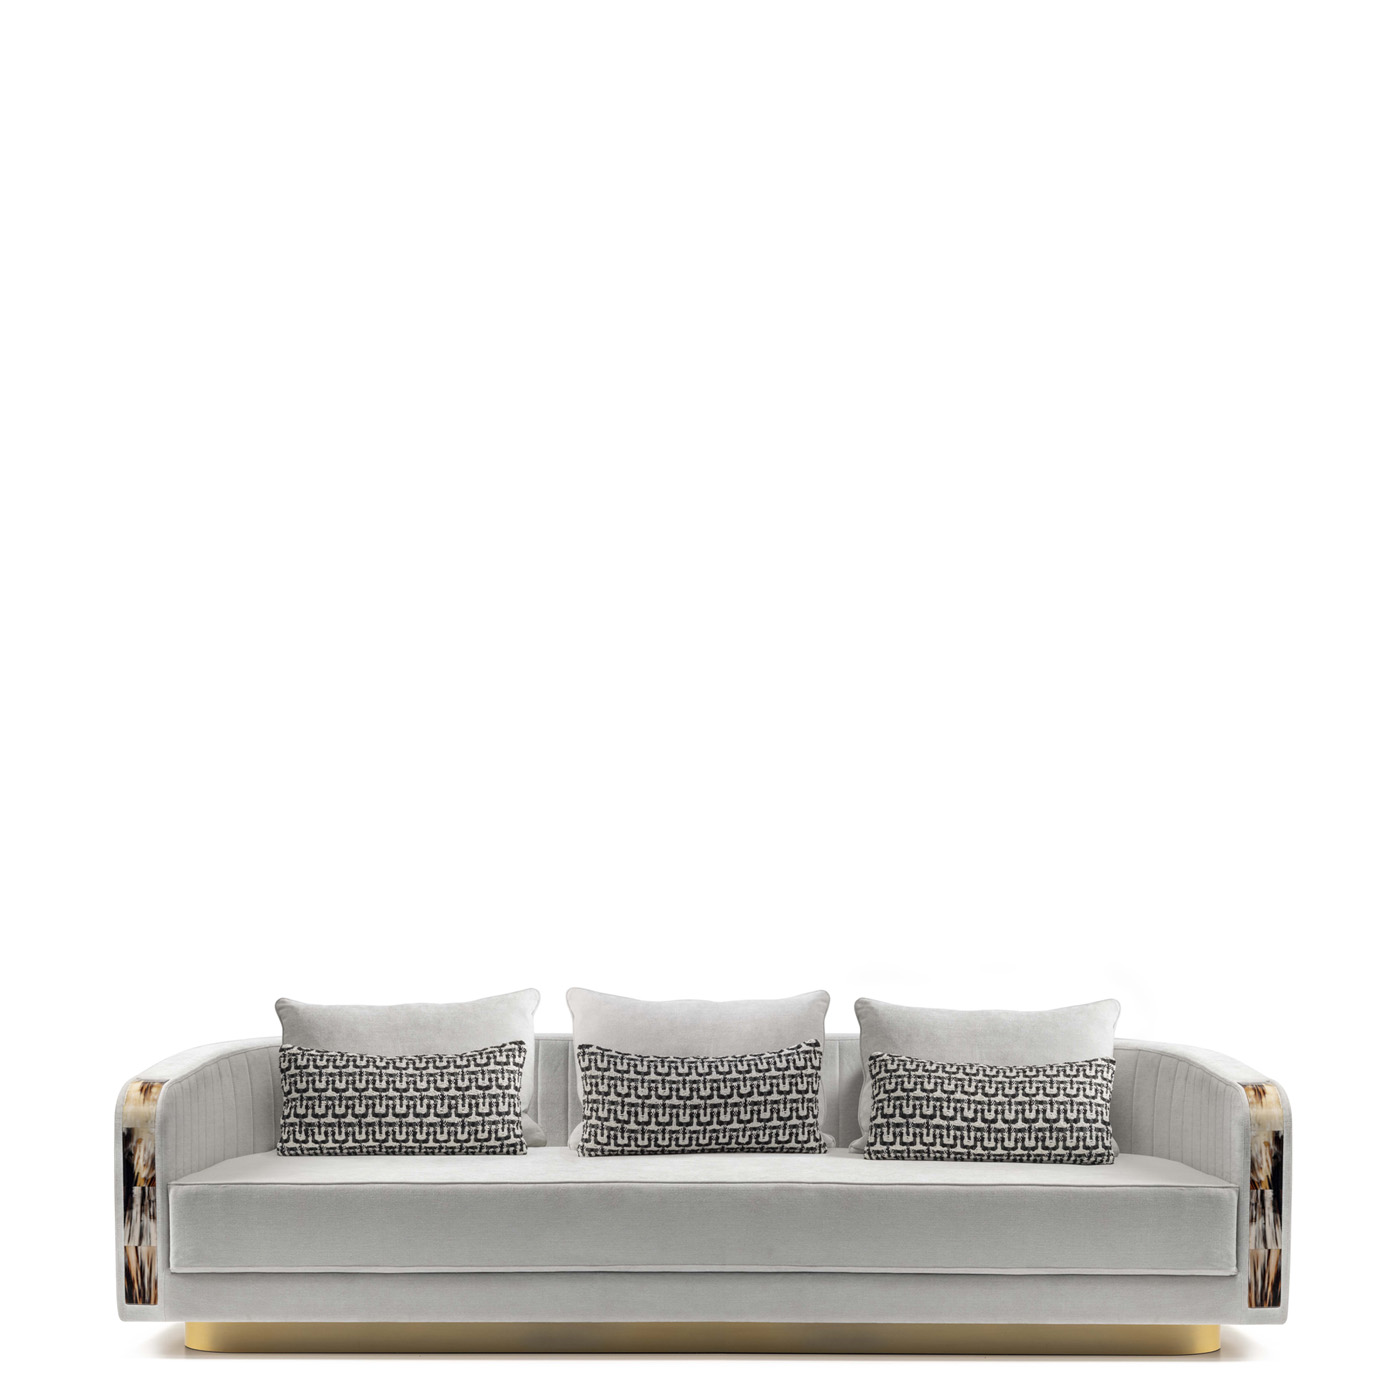 Sofas and seats - Afrodite sofa in Belsuede fabric with horn armrests - Arcahorn